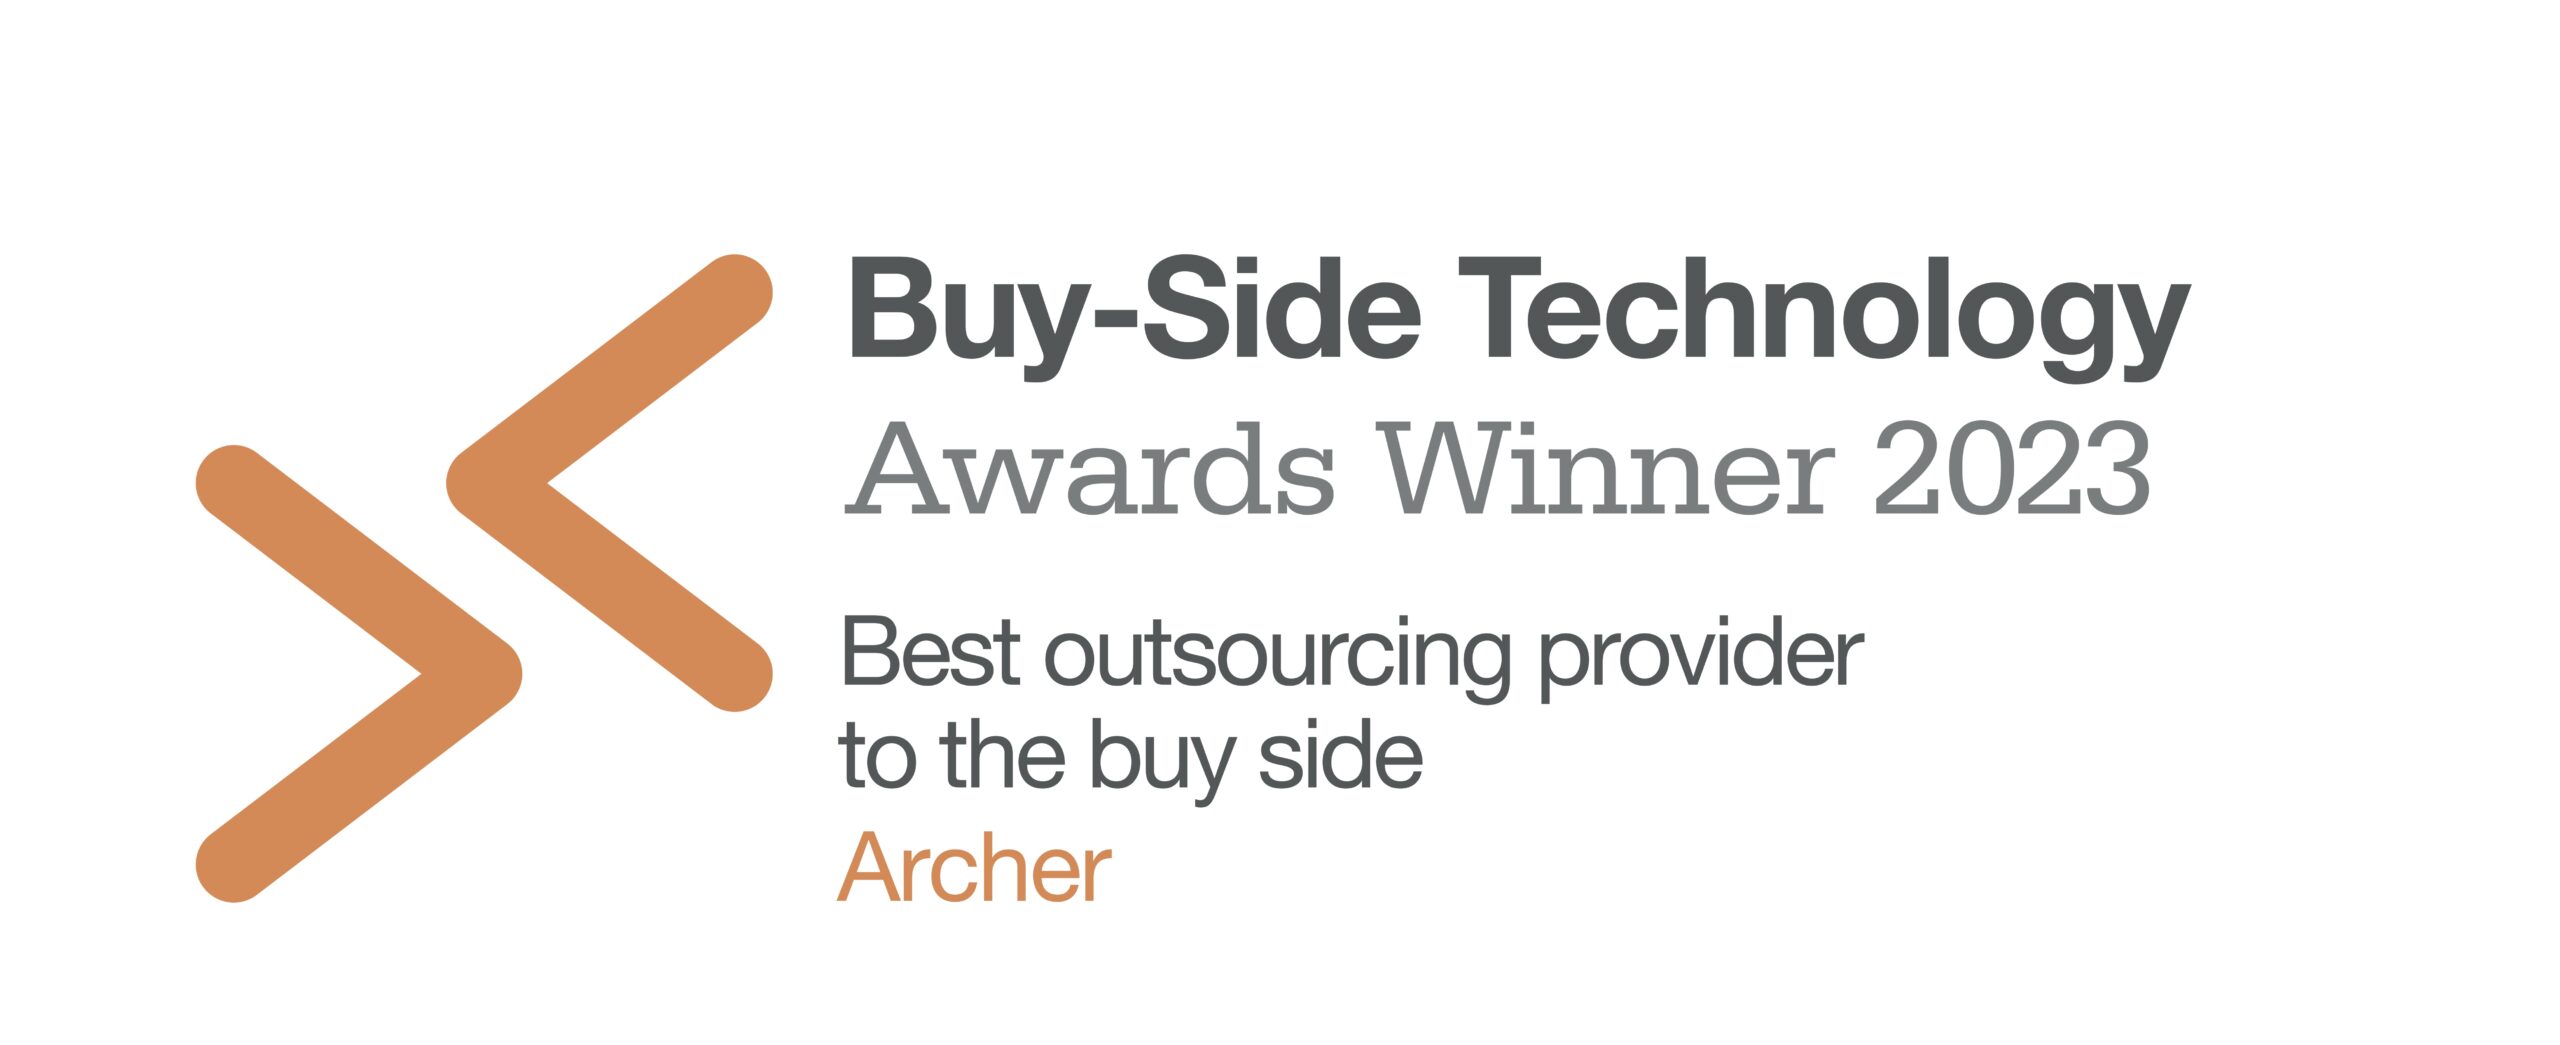 Archer® was named Best Outsourcing/BPO Provider to the Buy-Side in the 2023 WatersTechnology Buy-Side Technology Awards.